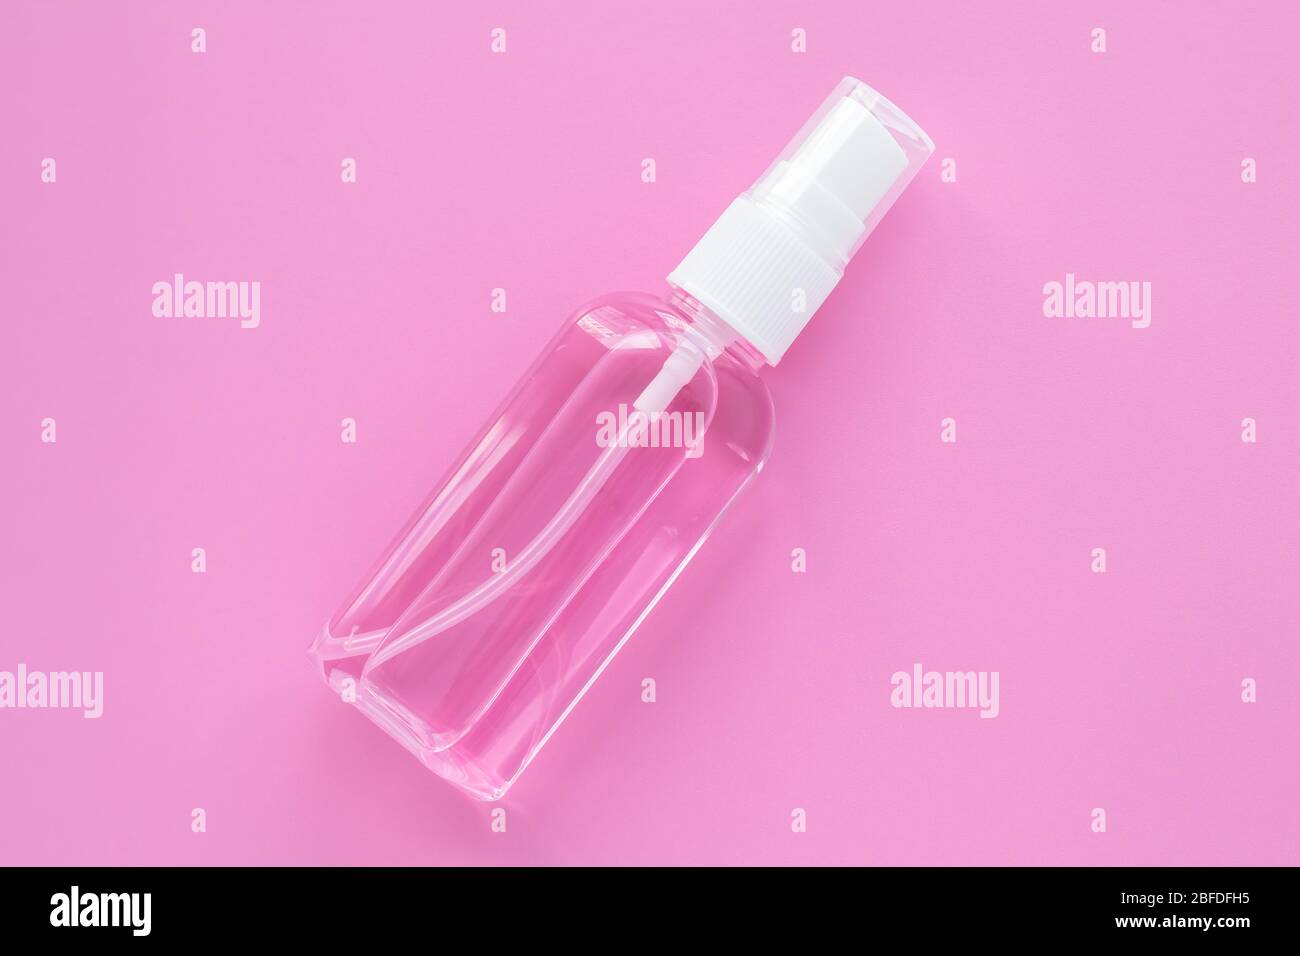 Cosmetic bottle with hand sanitizer, antiseptic spray for disinfection. Remover liquid in container on a pink background. Cleanser product Stock Photo